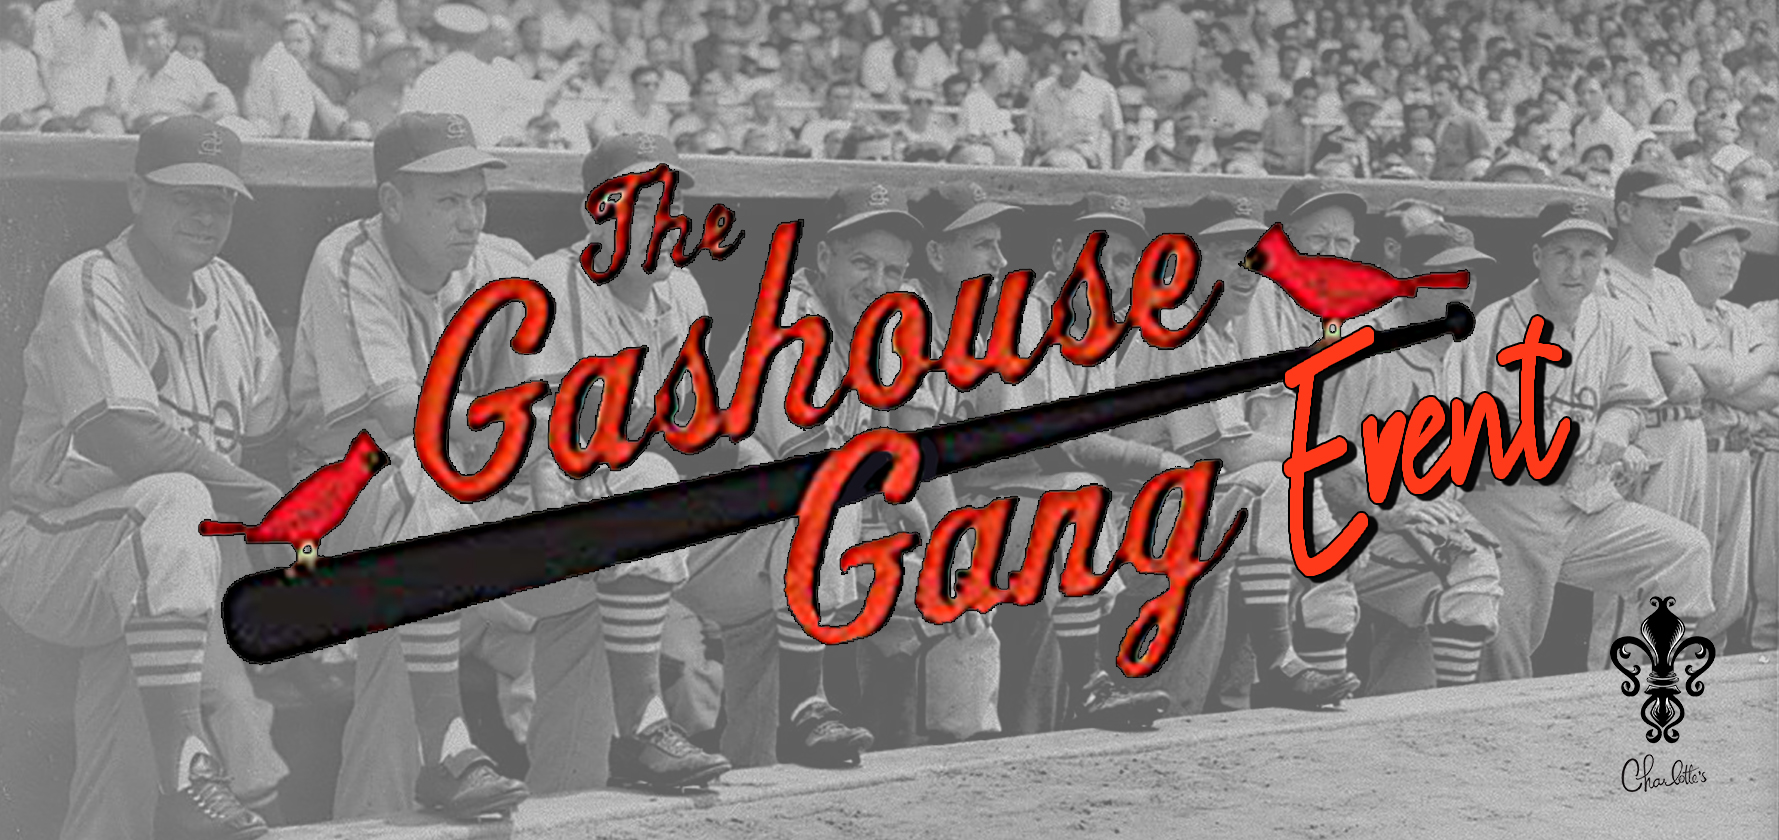 The Gashouse Gang Event